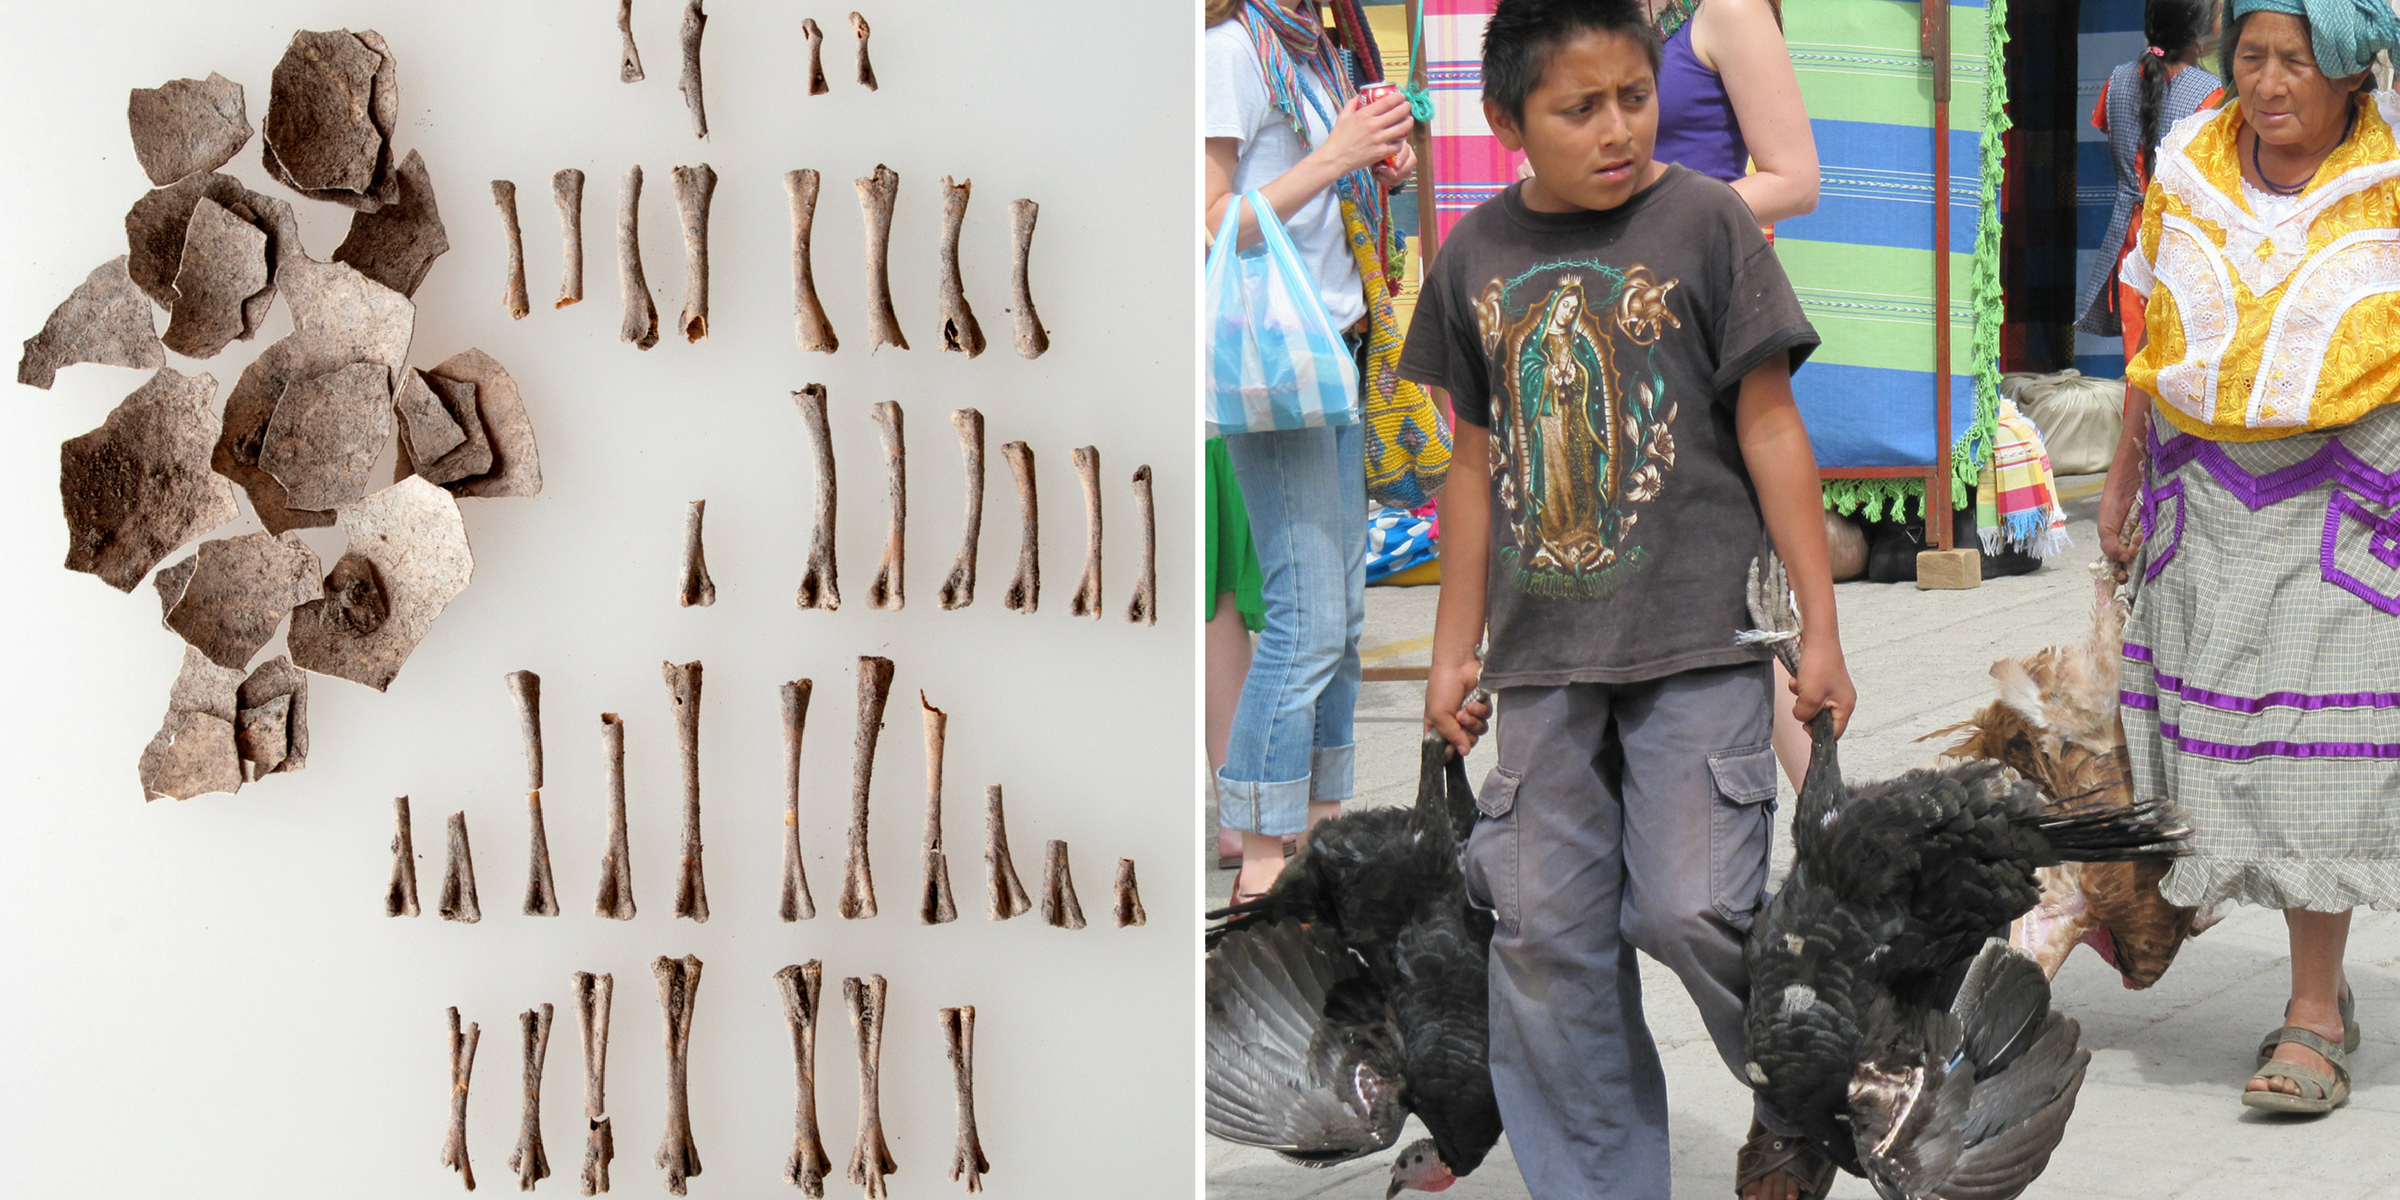 Left: Pieces of eggshell and small bones laid out in rows. Right: A young boy and an older woman carry live turkeys by the feet through a market.